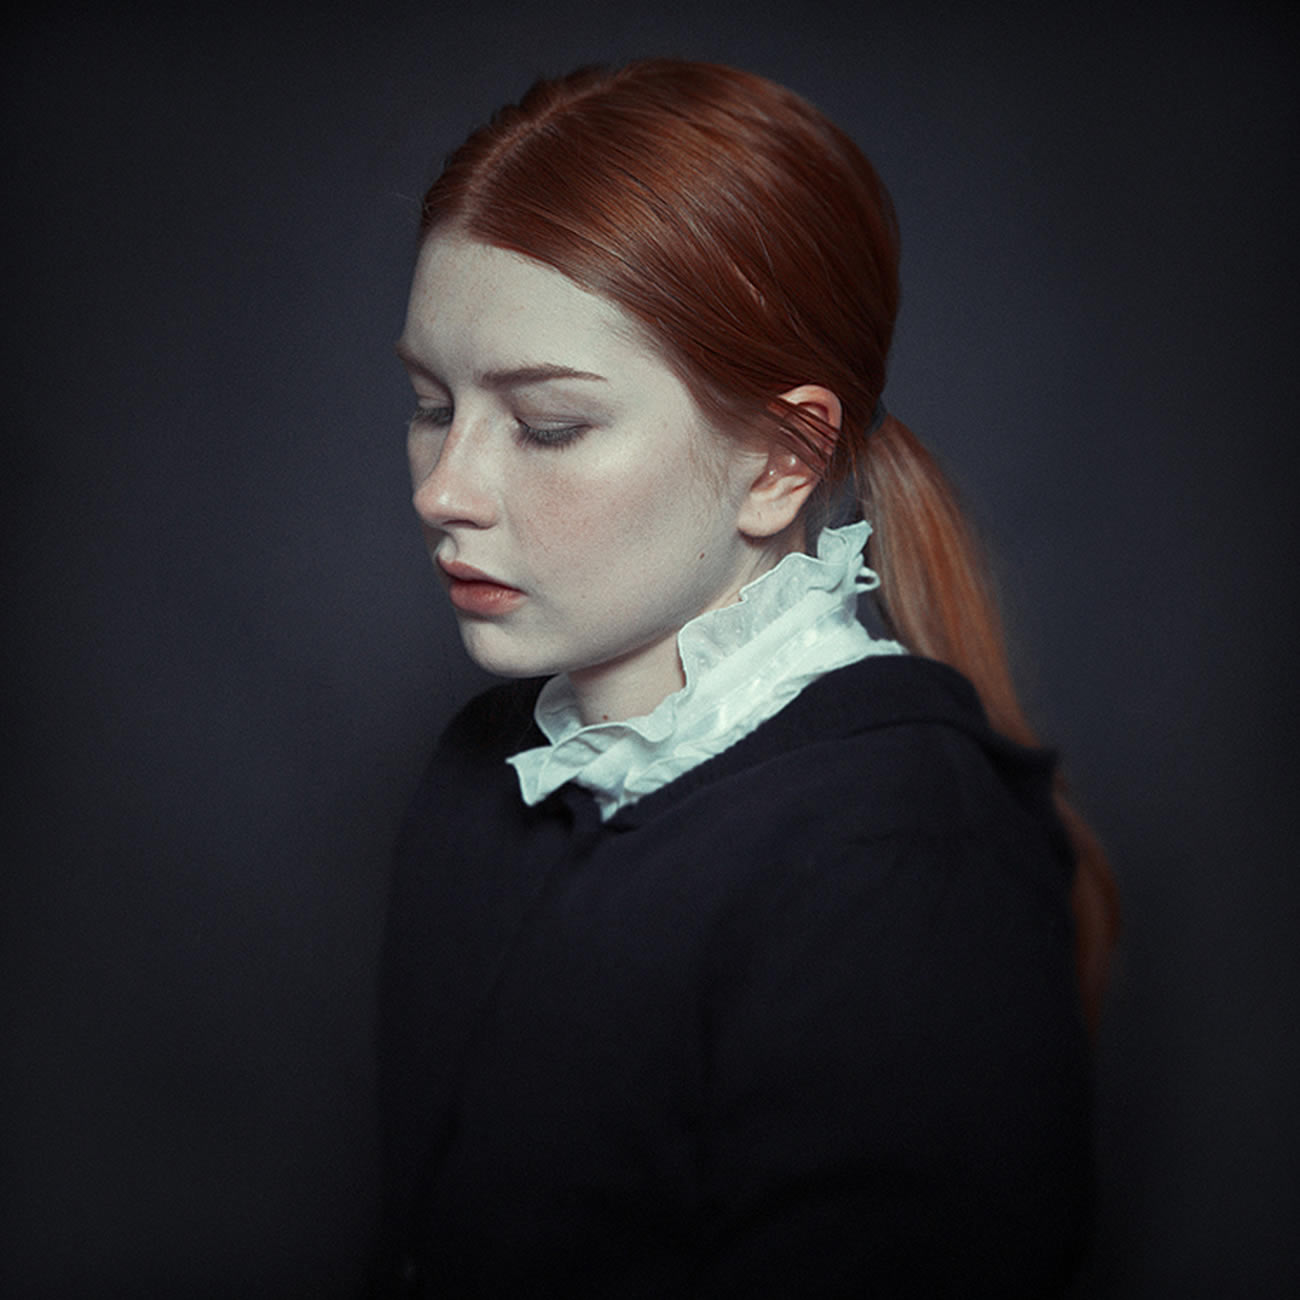 red hair girl portrait, photography by Michael Magin